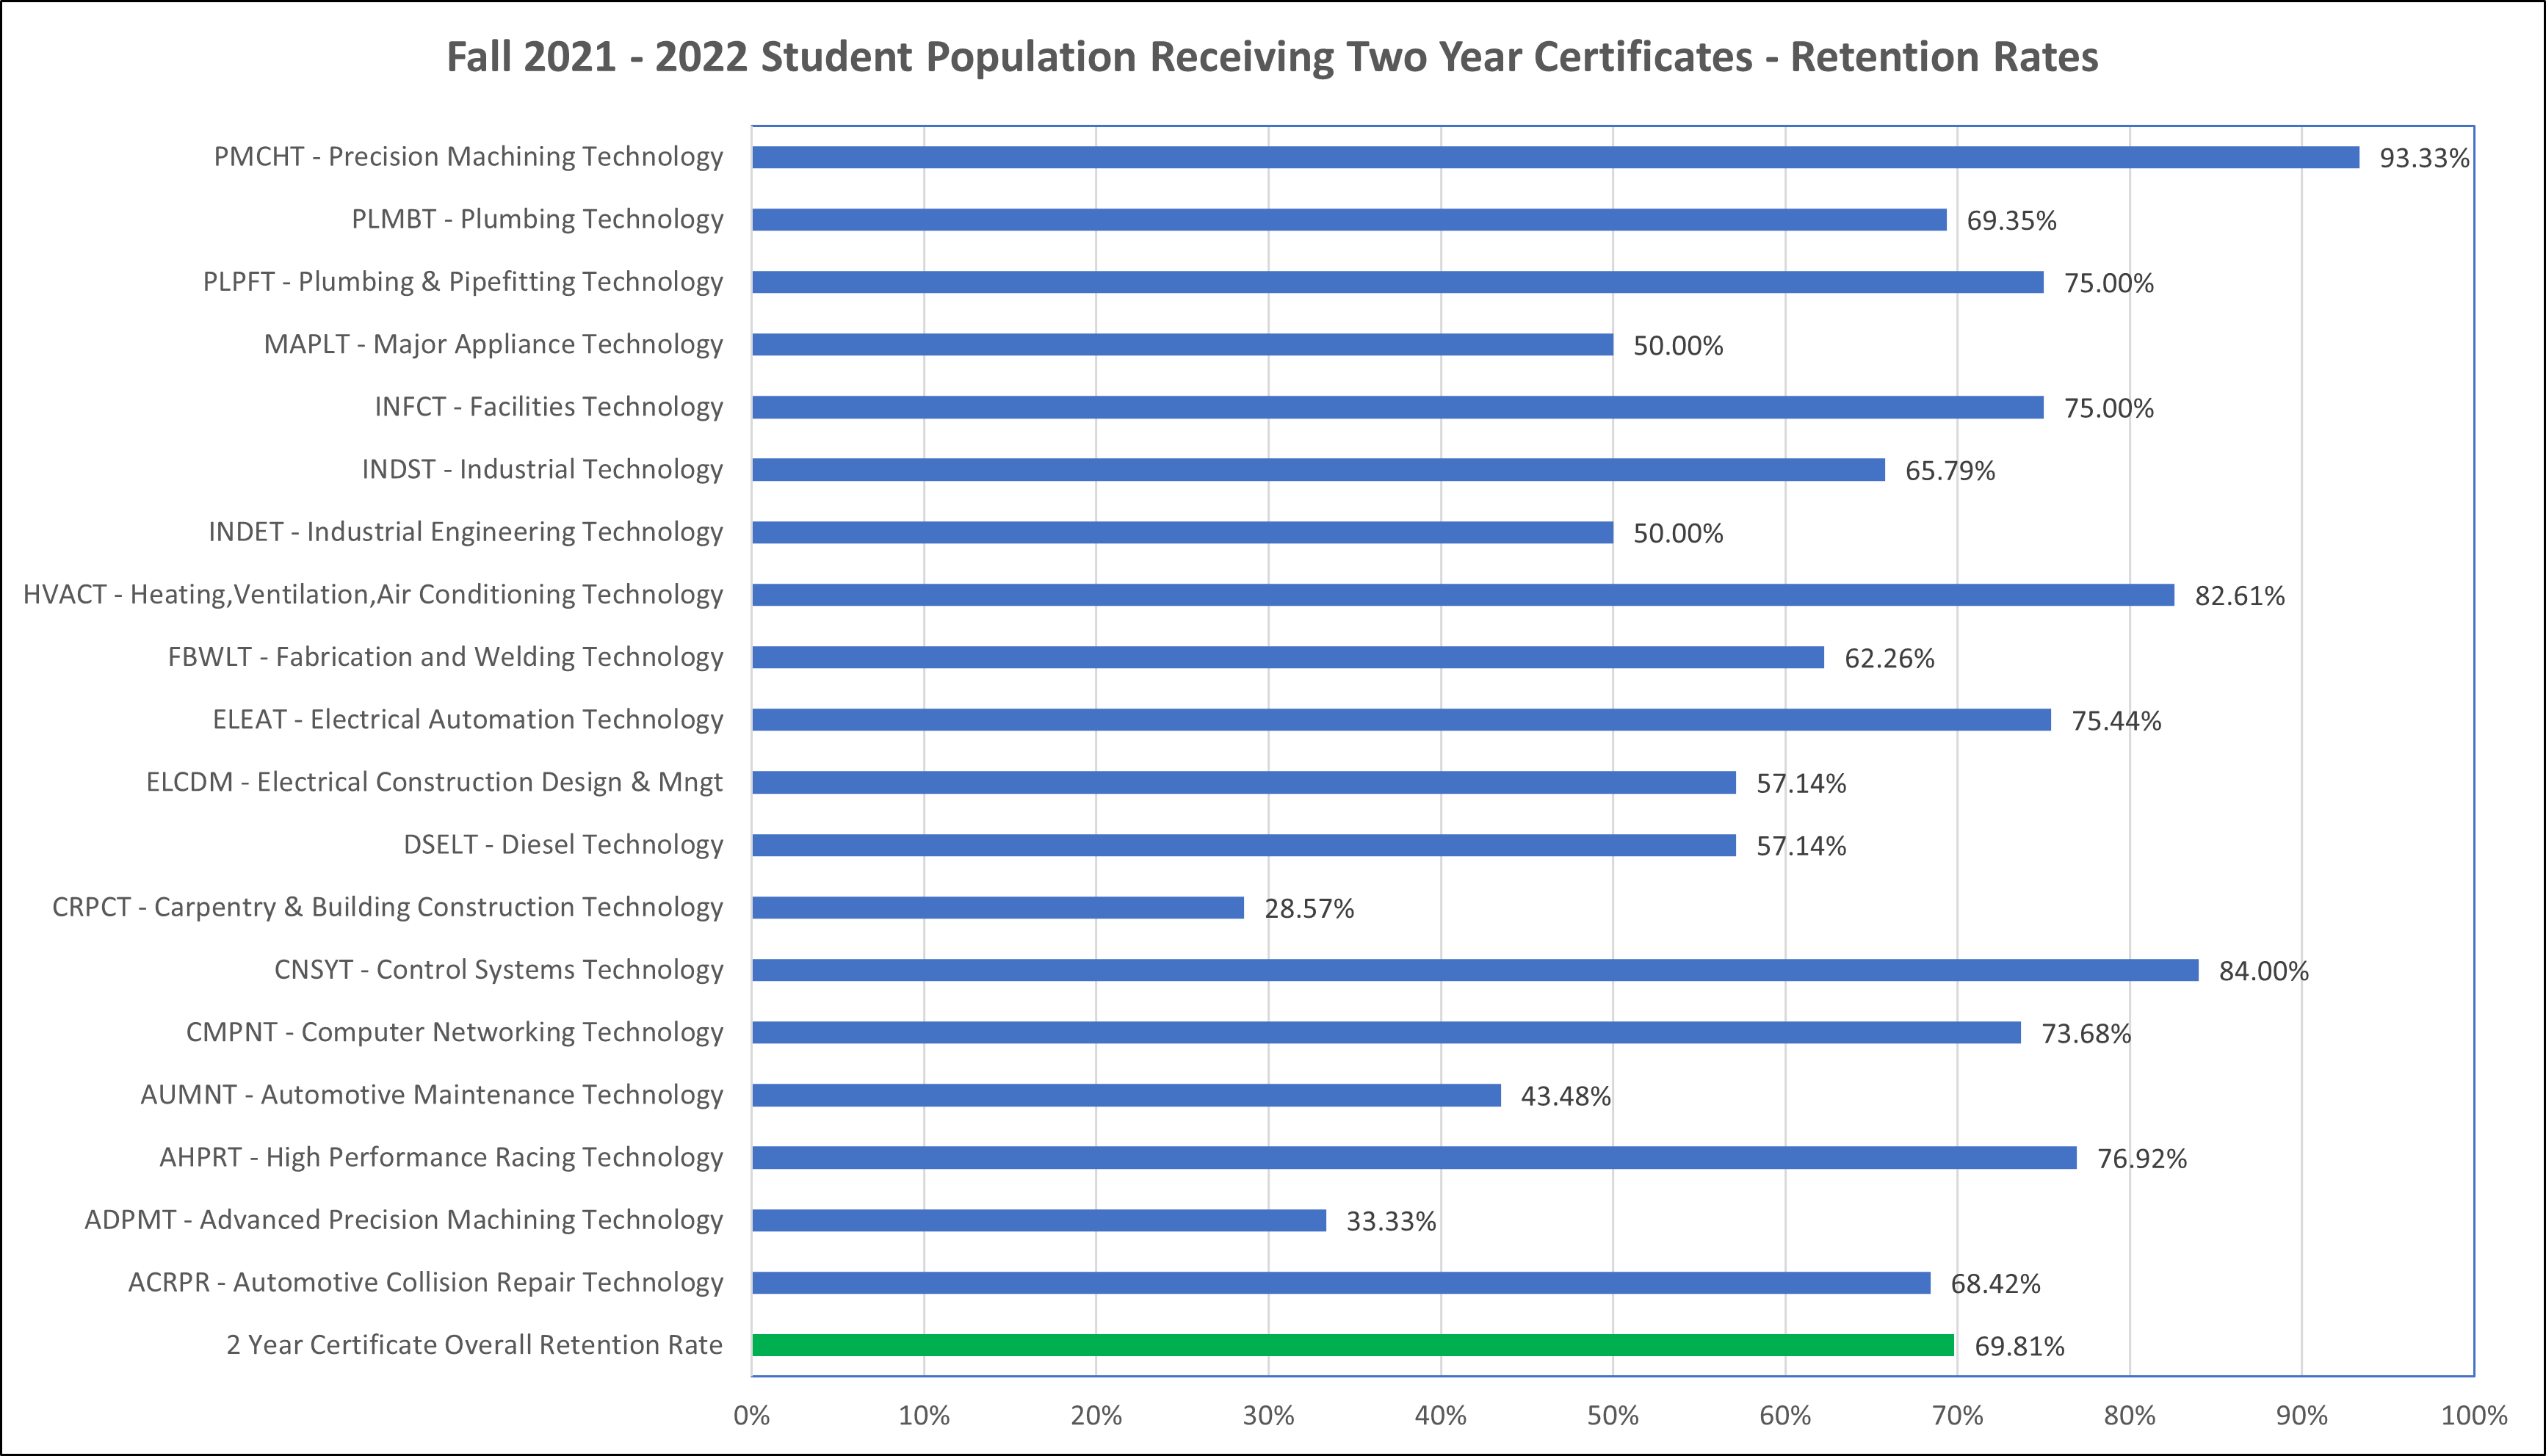 Fall 2021 - 2022 Student Population Receiving Two Year Certificates - Retention Rates